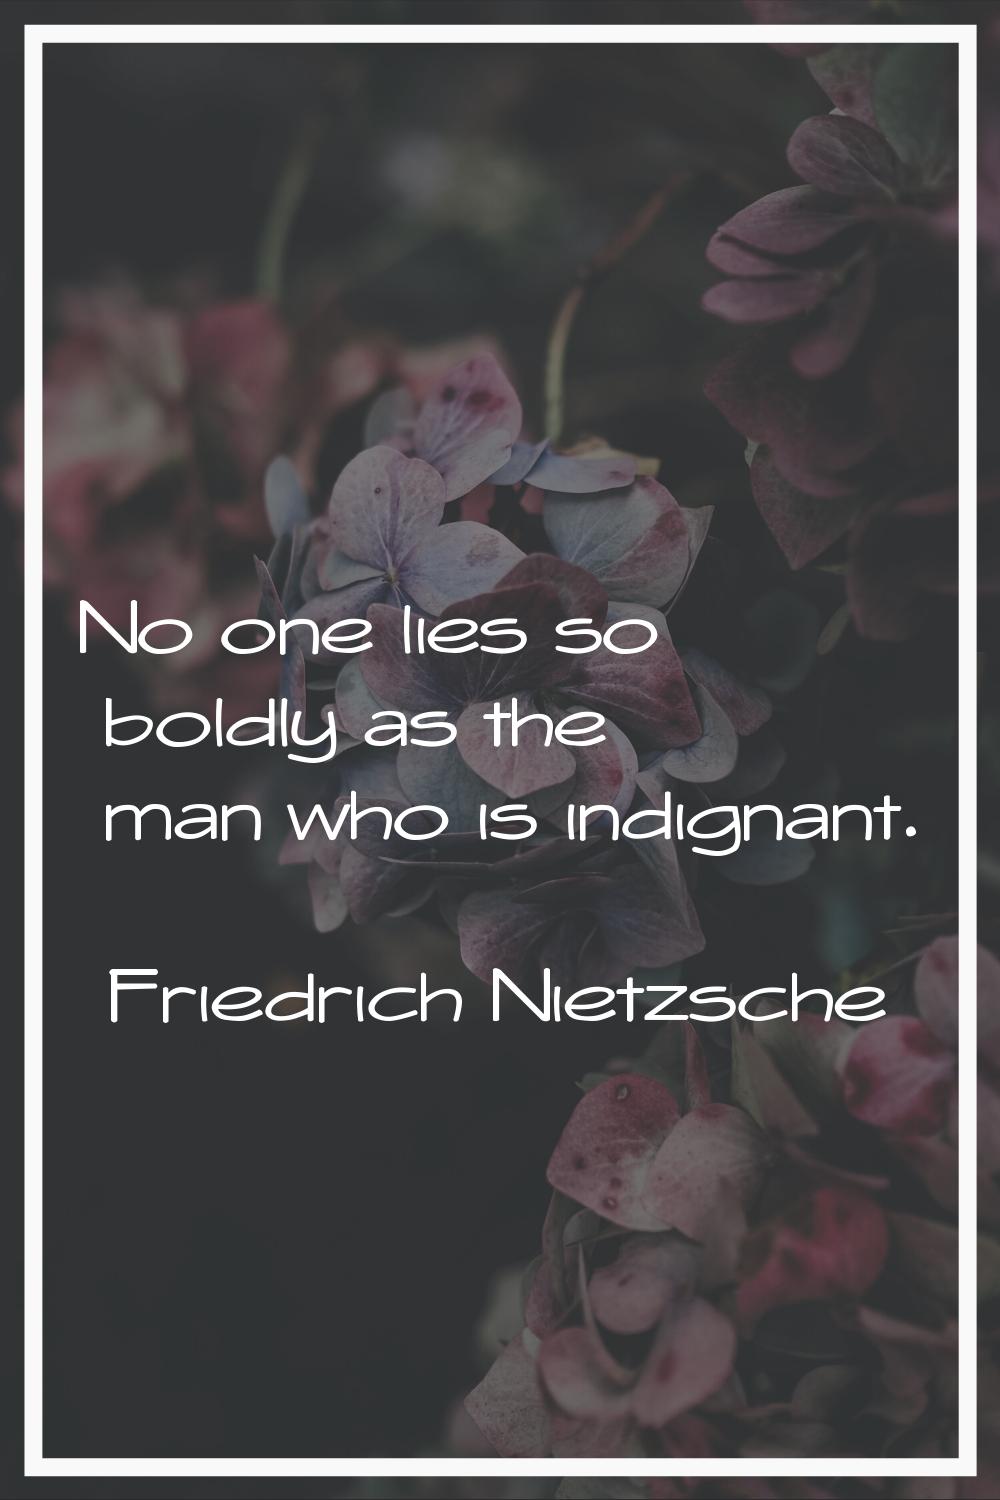 No one lies so boldly as the man who is indignant.